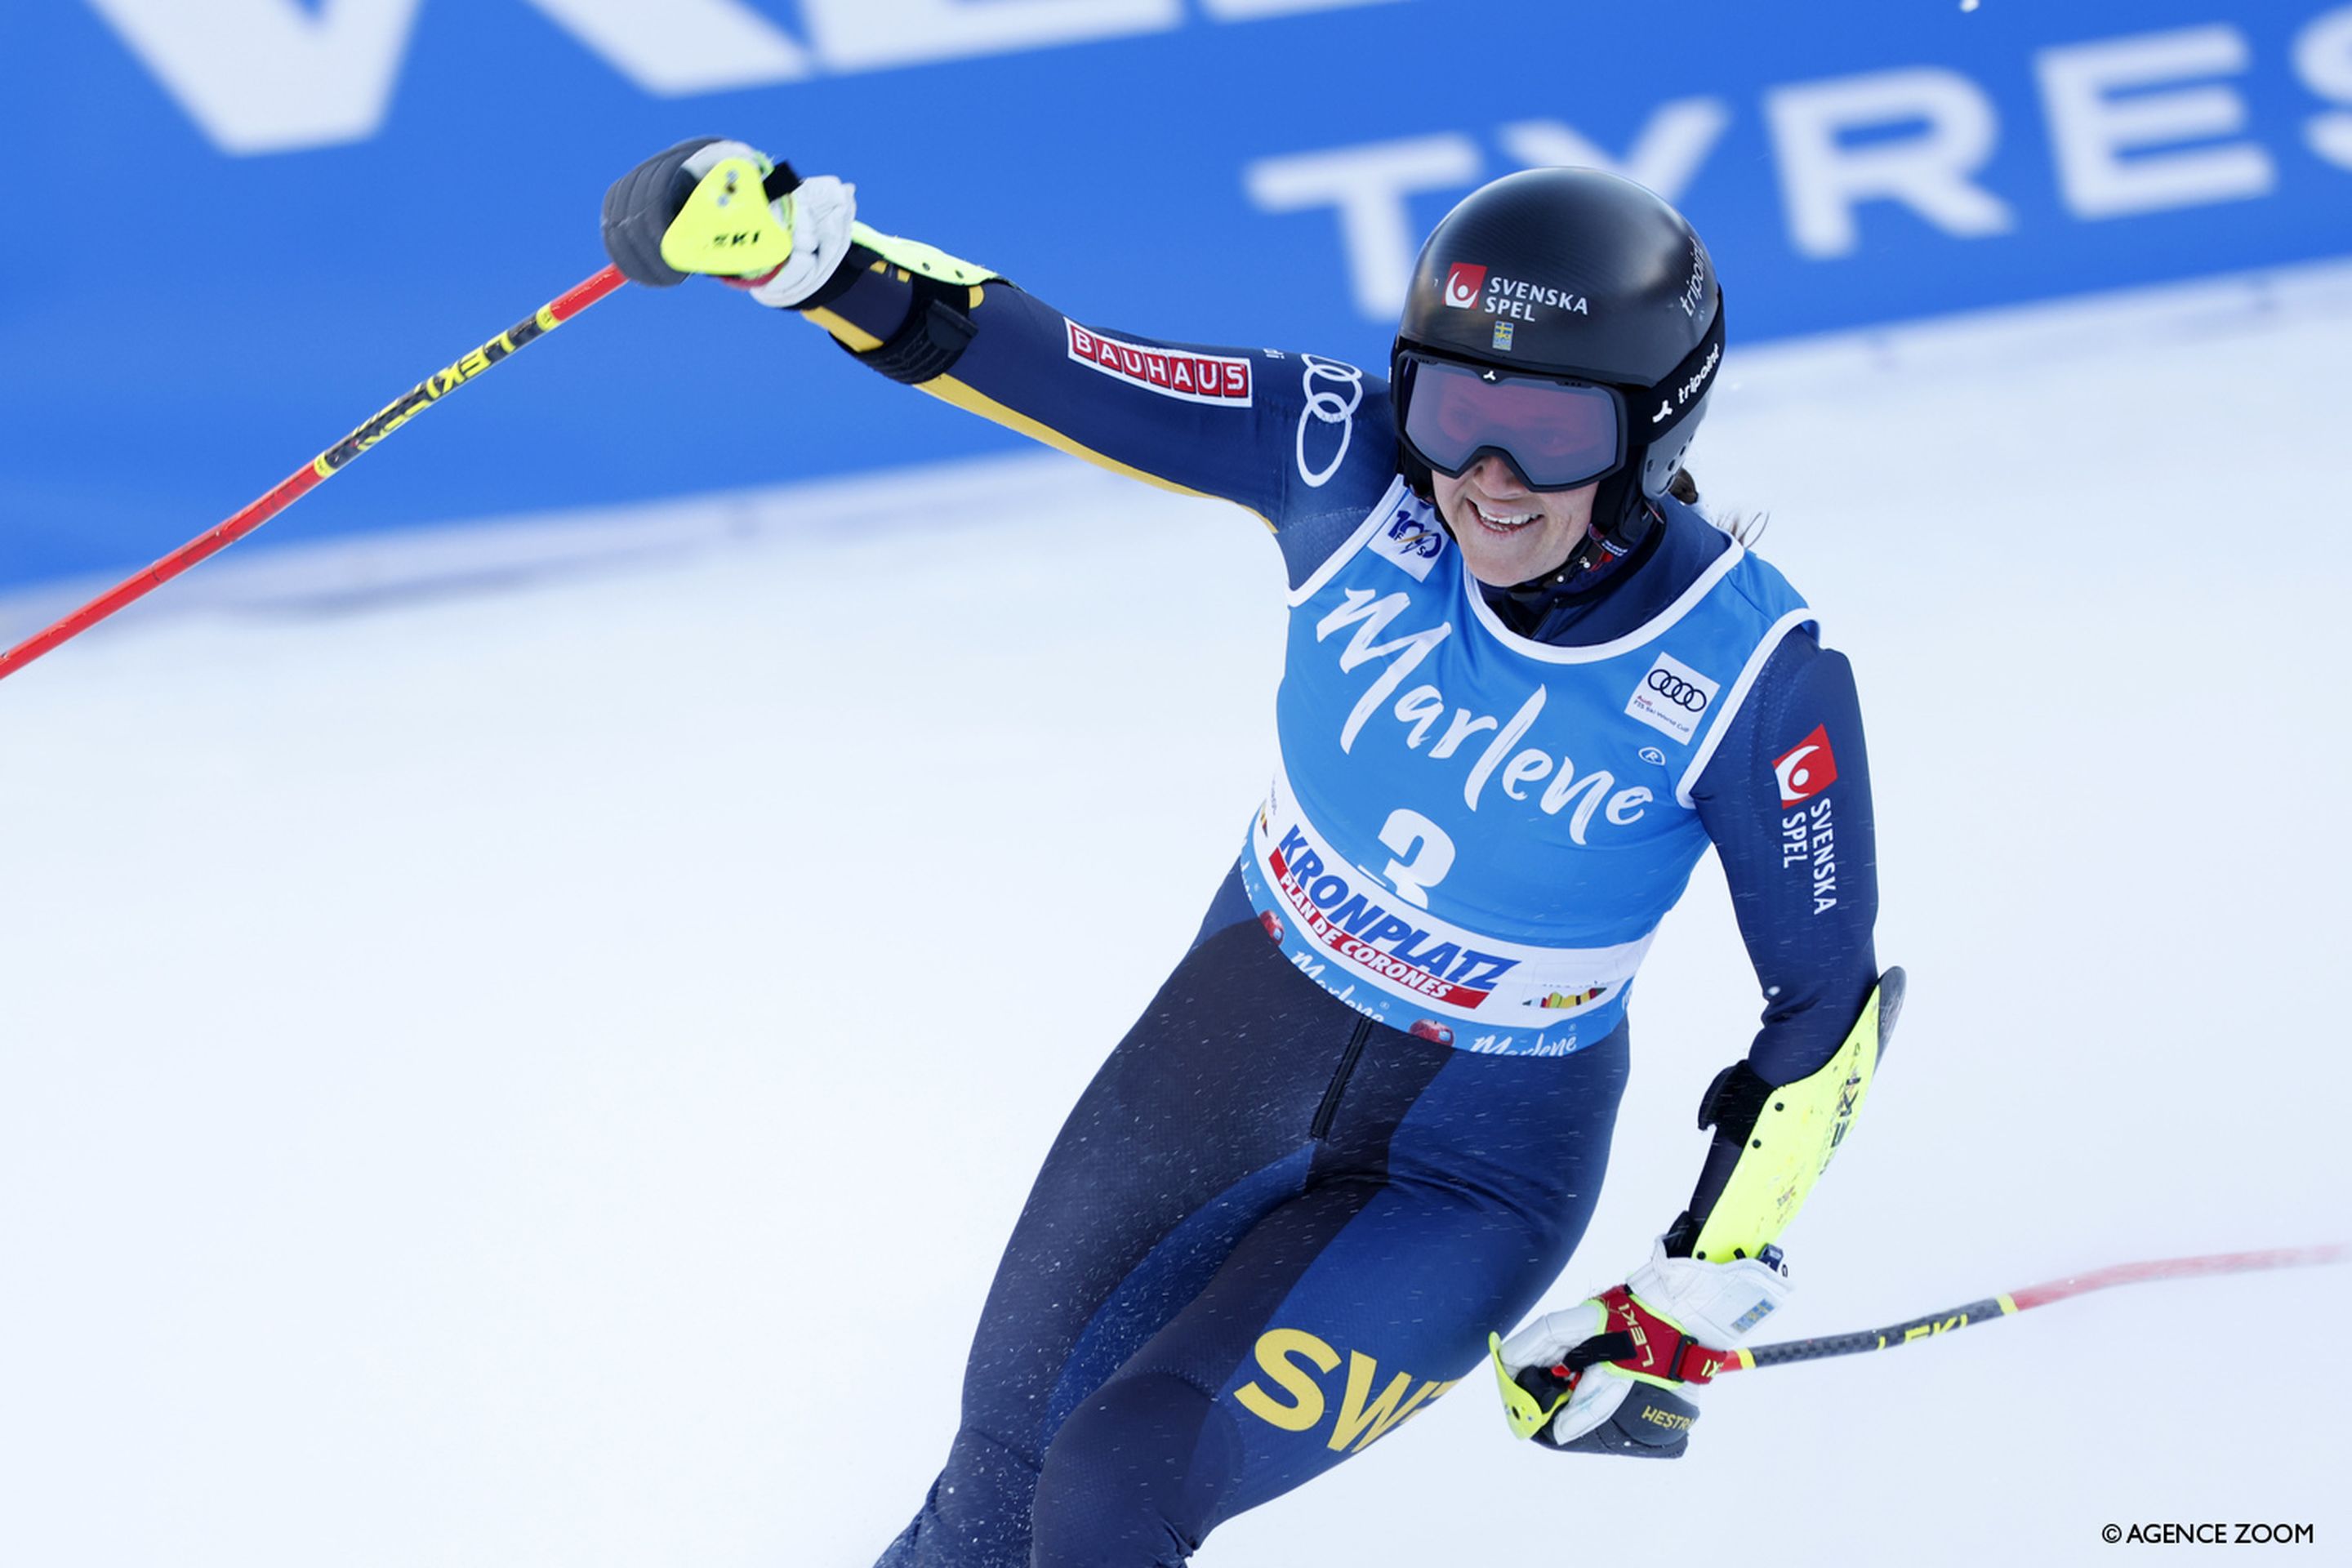 Sara Hector (SWE) reached her third podium in the last four giant slalom races (Agence Zoom)